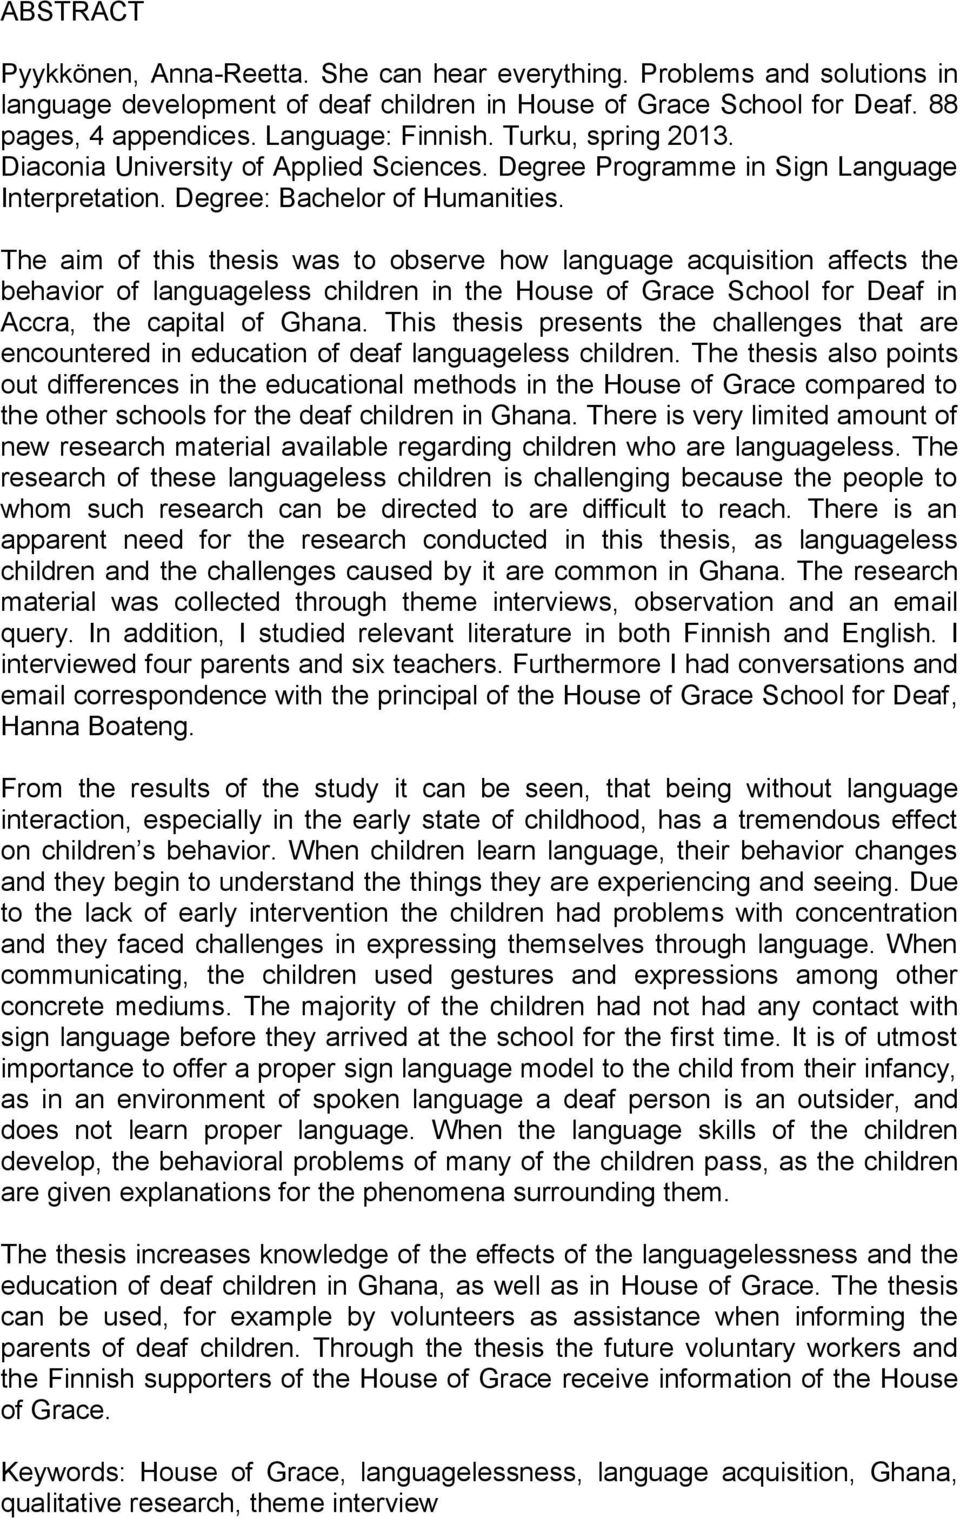 The aim of this thesis was to observe how language acquisition affects the behavior of languageless children in the House of Grace School for Deaf in Accra, the capital of Ghana.